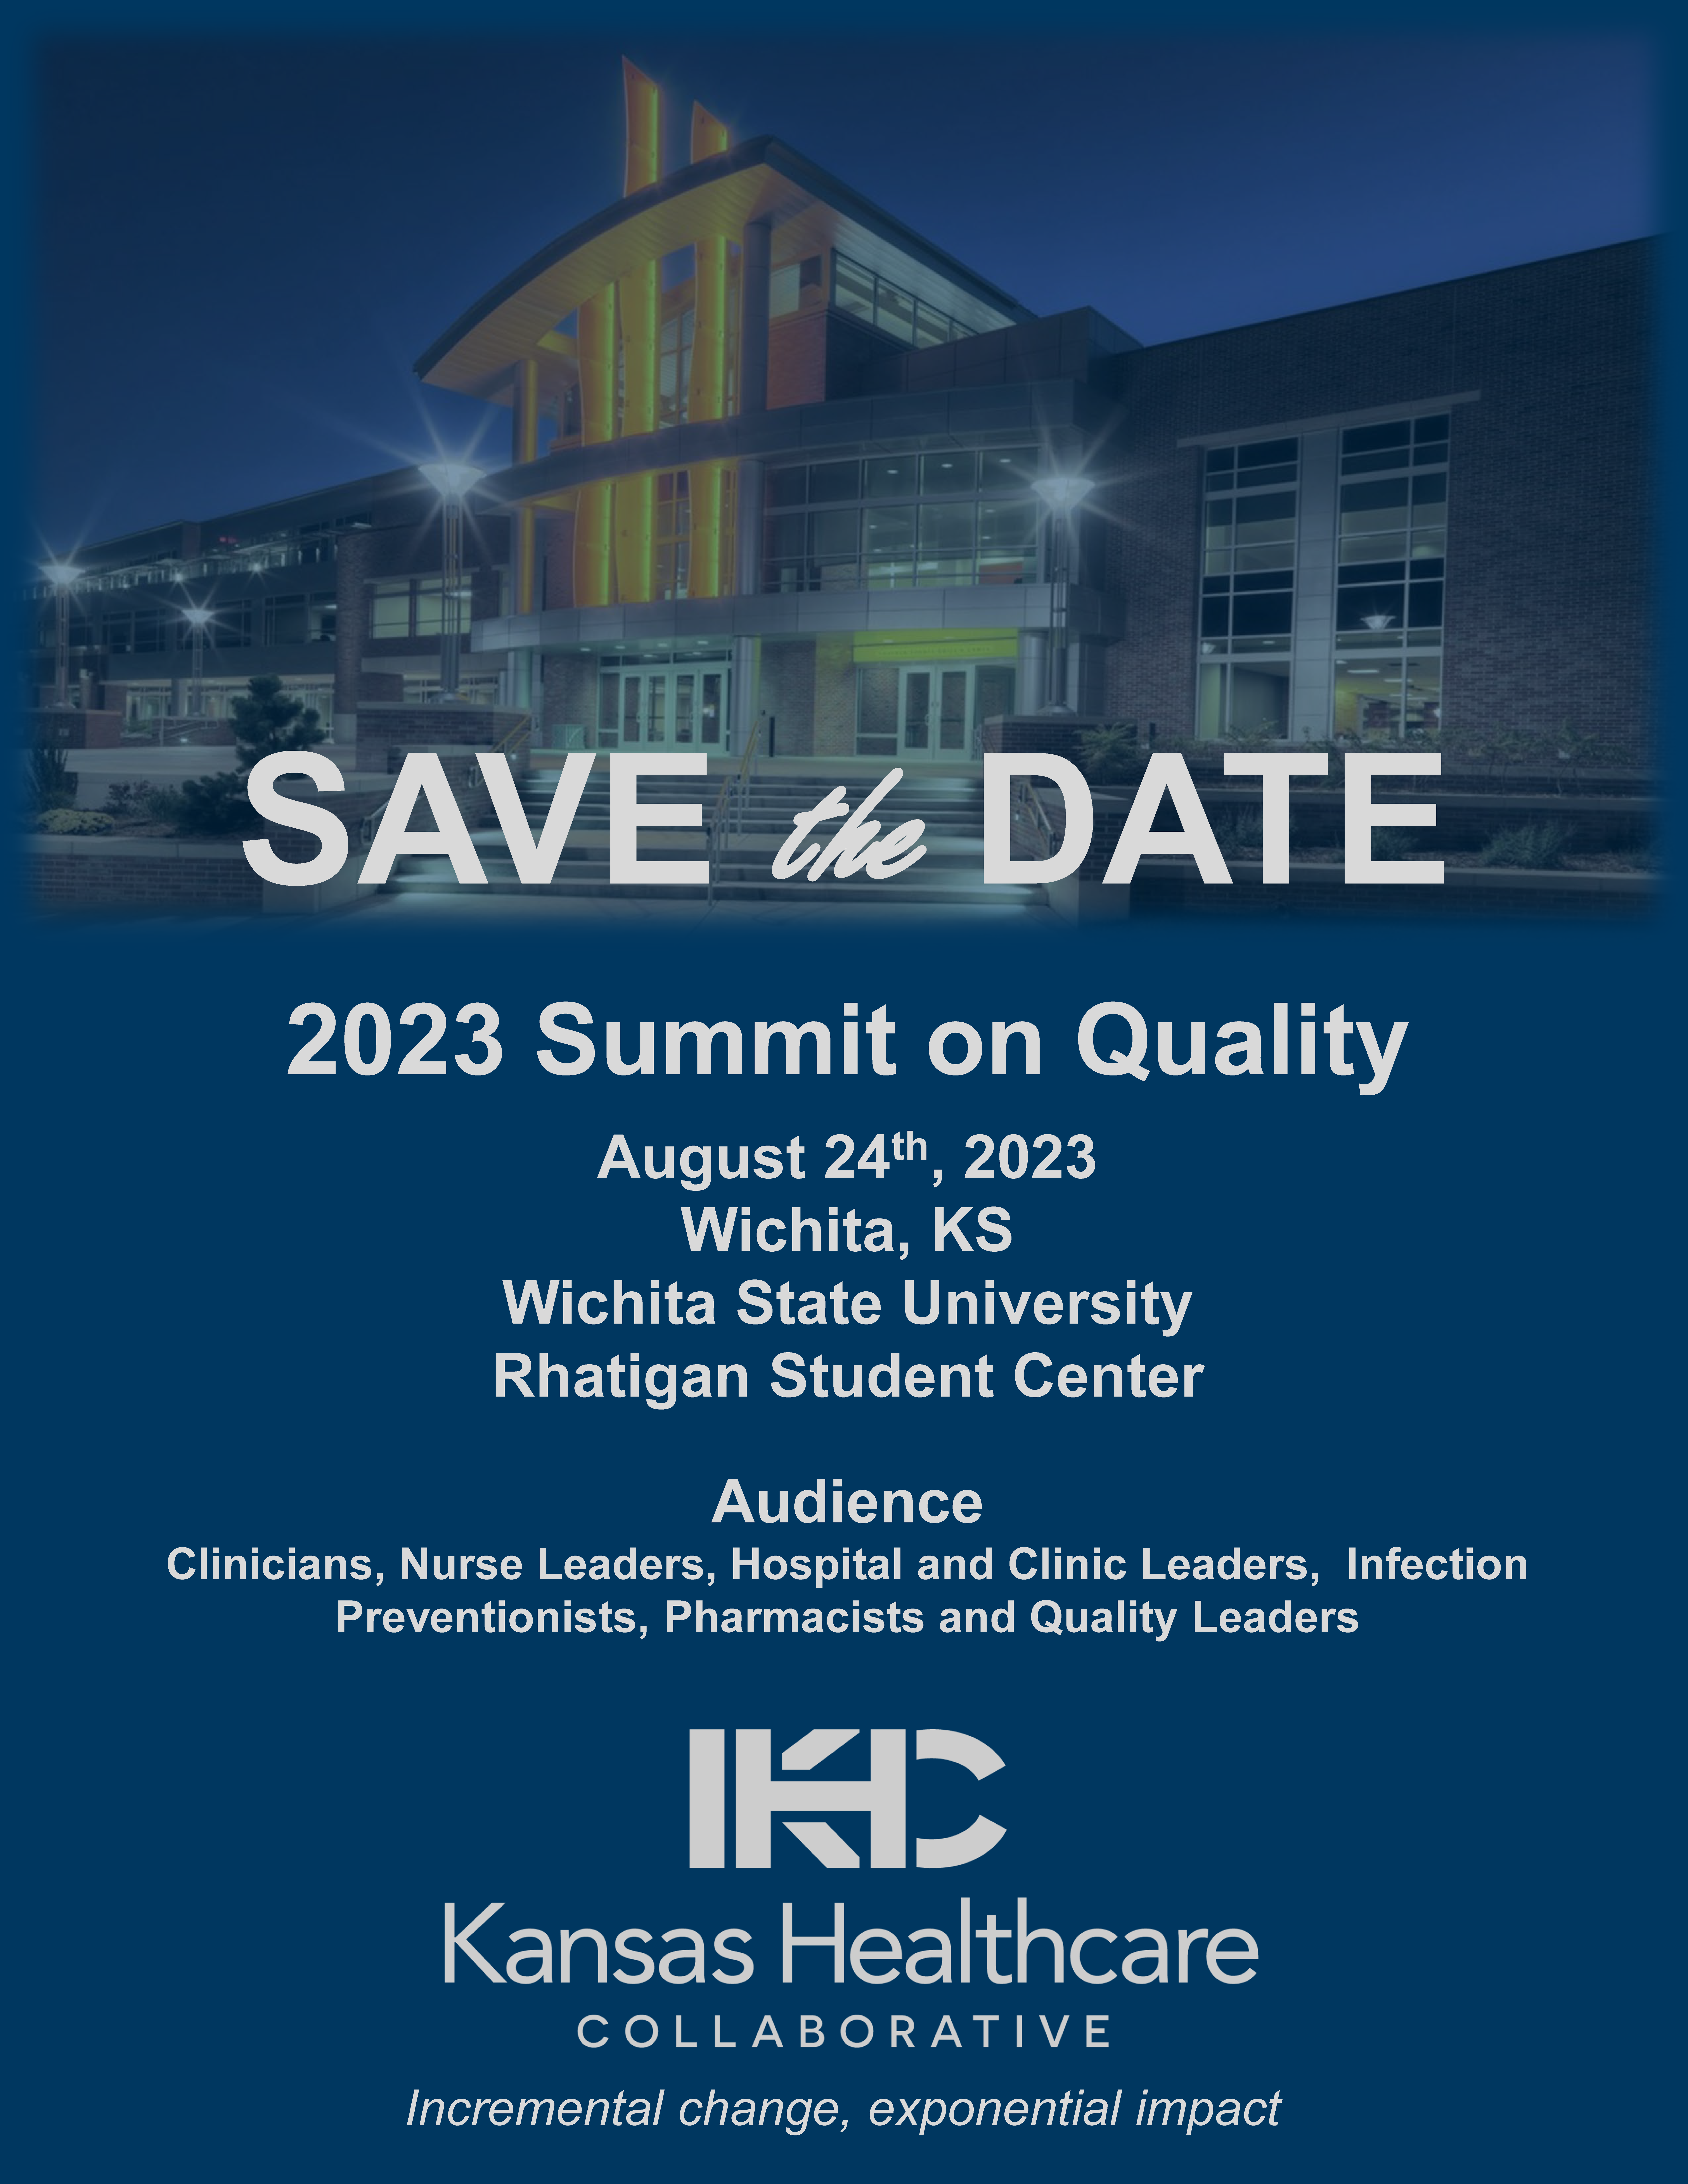 Save the Date for KHC 2023 Summit on Quality